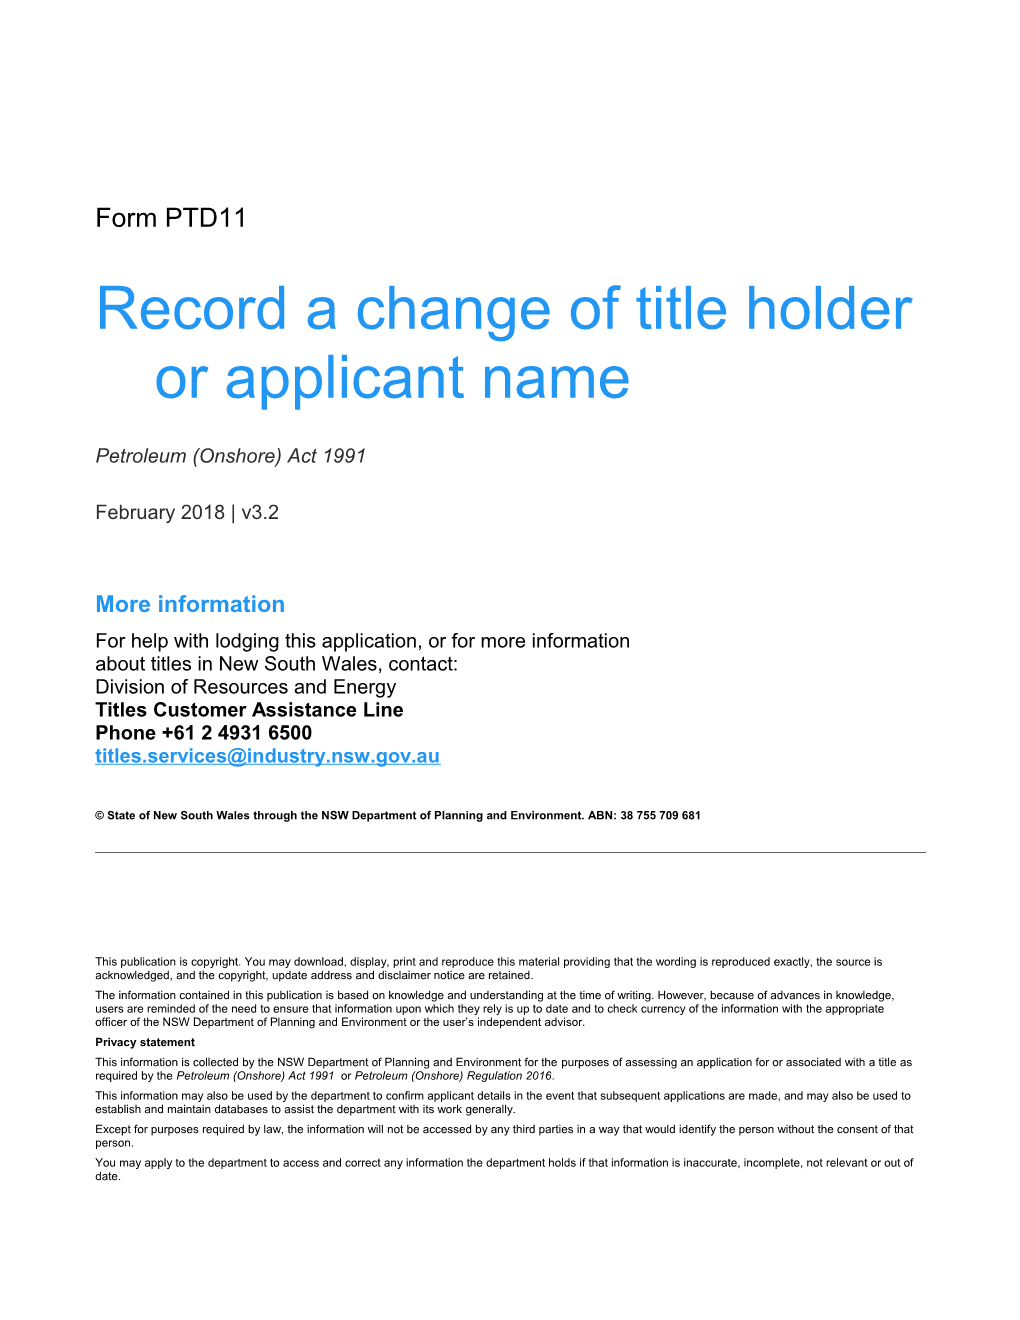 PTD11 Record a Change of Title Holder Or Applicant Name